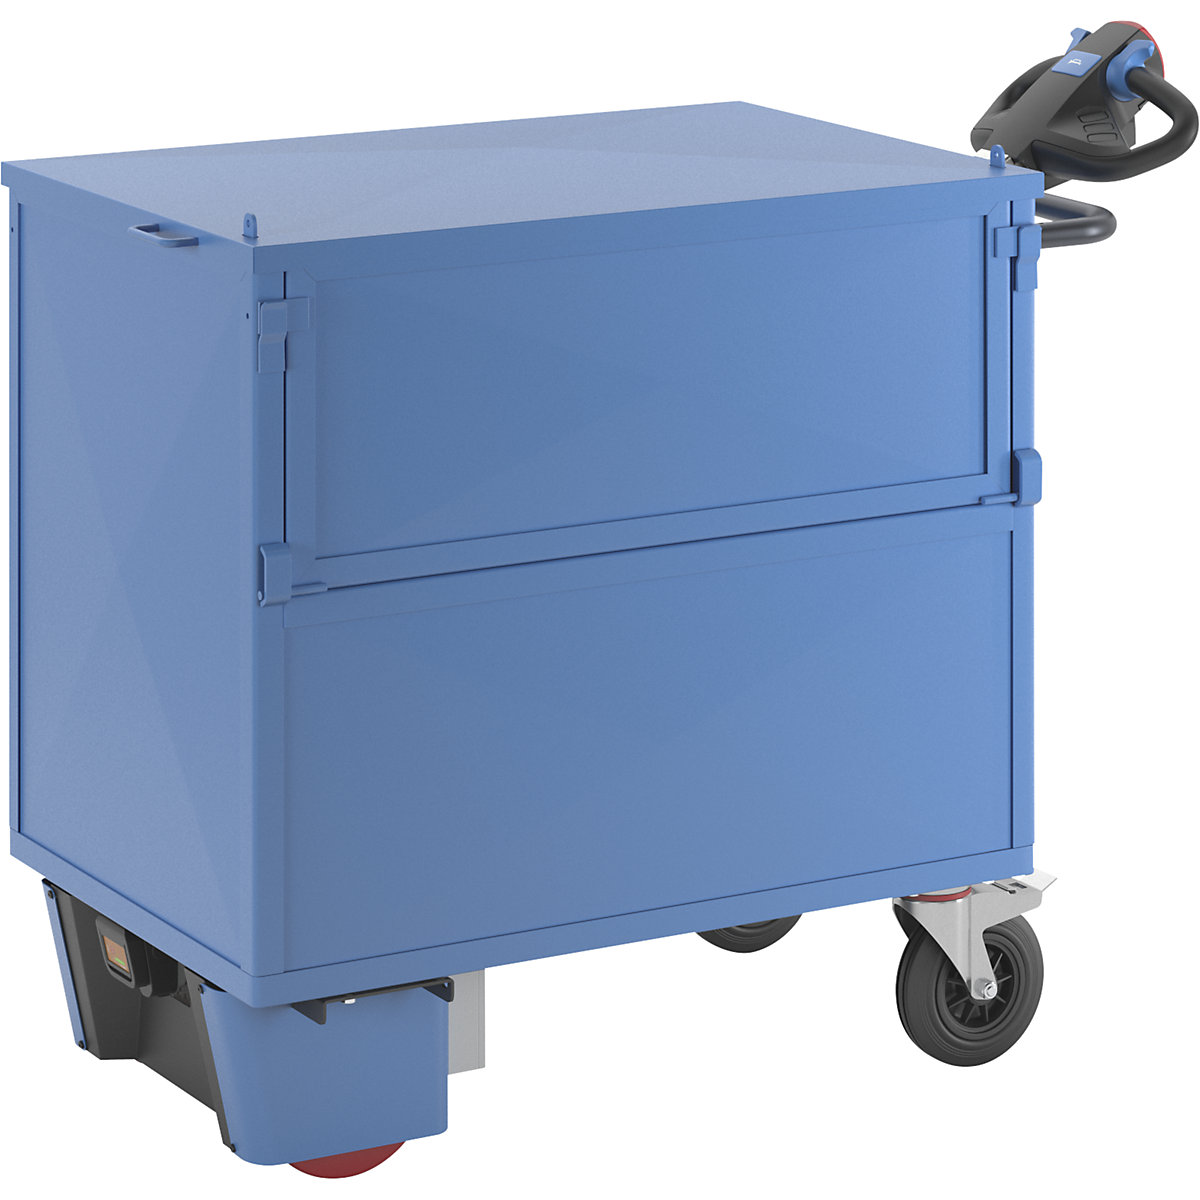 Box truck with electric drive - eurokraft pro